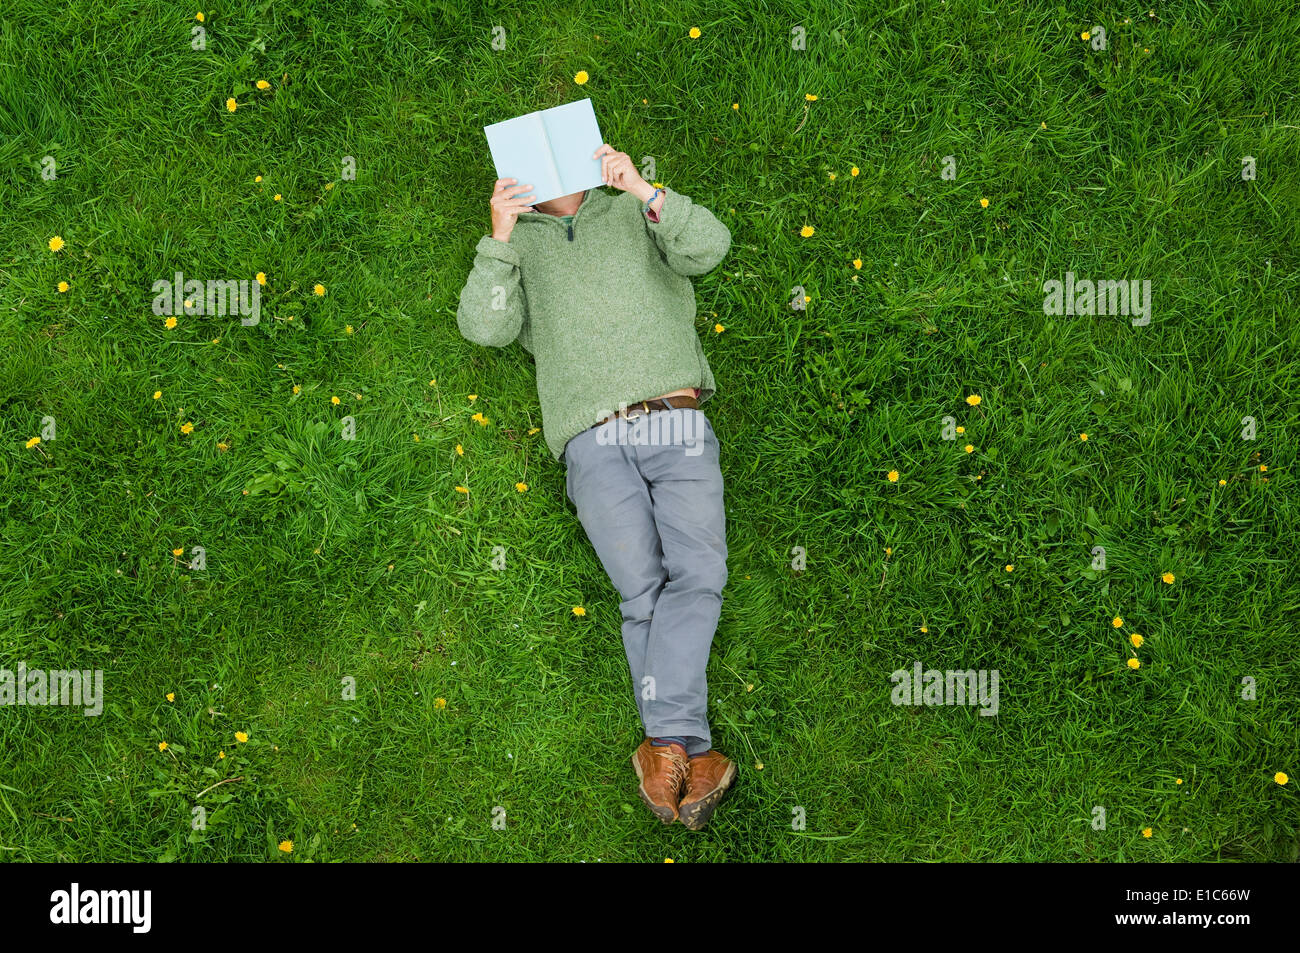 A man lying on his back on the grass, reading a book. Stock Photo